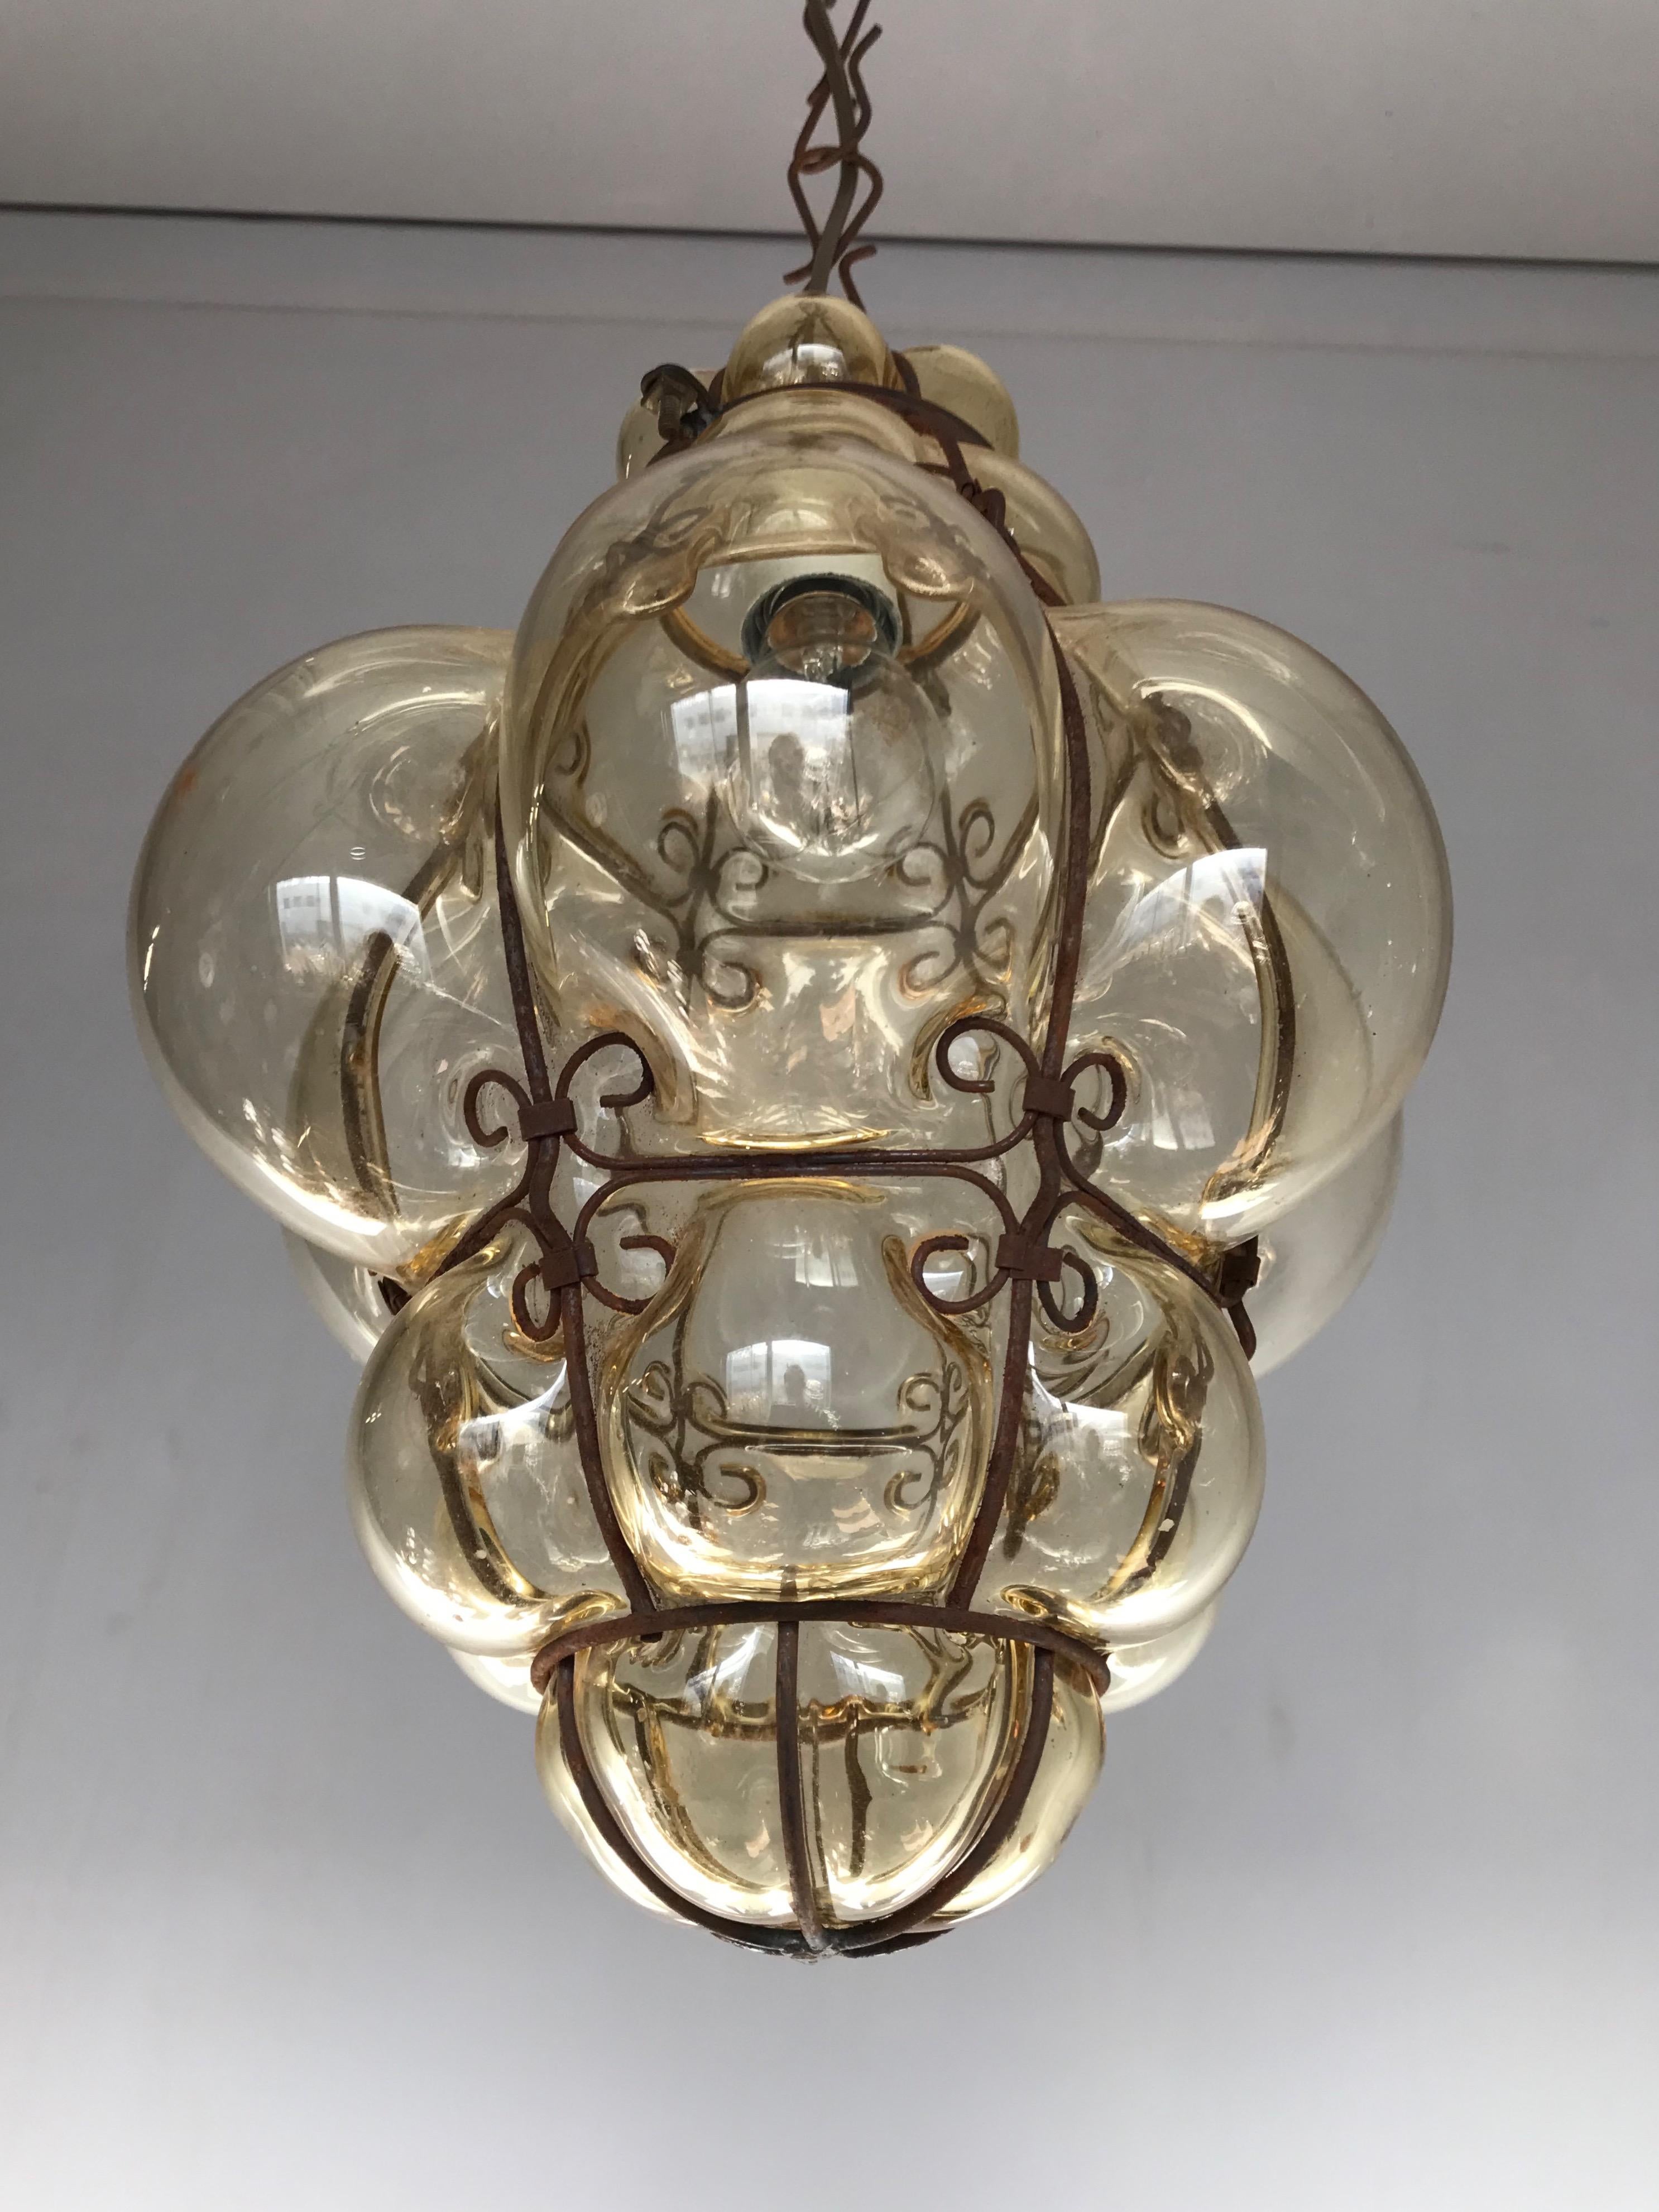 Beautiful color and practical size fixture with mouthblown glass in a metal frame.

If you are looking for a rare and stylish fixture to grace your home then this handmade antique specimen could be perfect. With early 20th century lighting as one